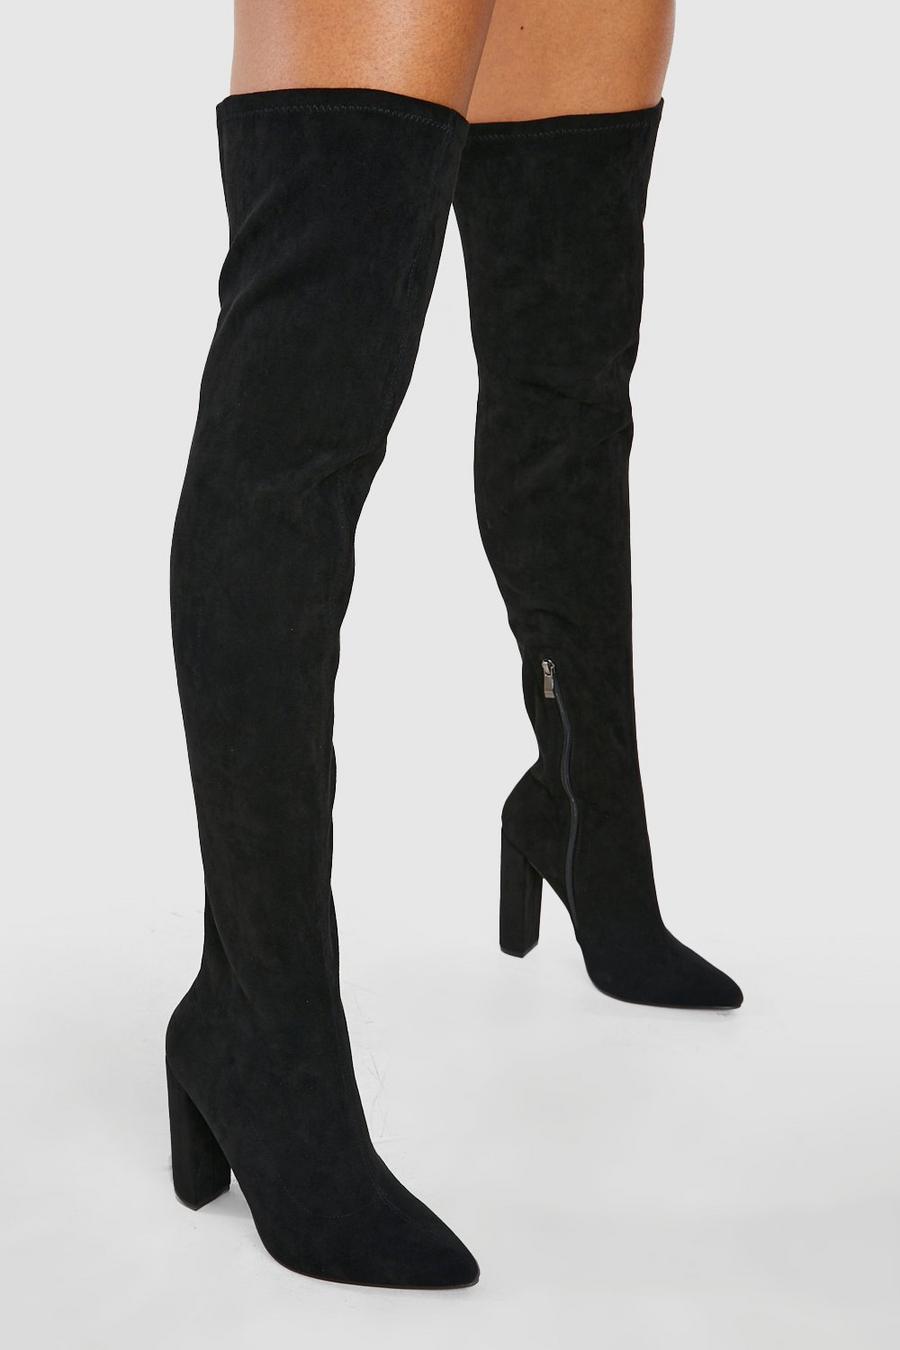 Black High Block Heel Pointed Toe Over The Knee Boots image number 1